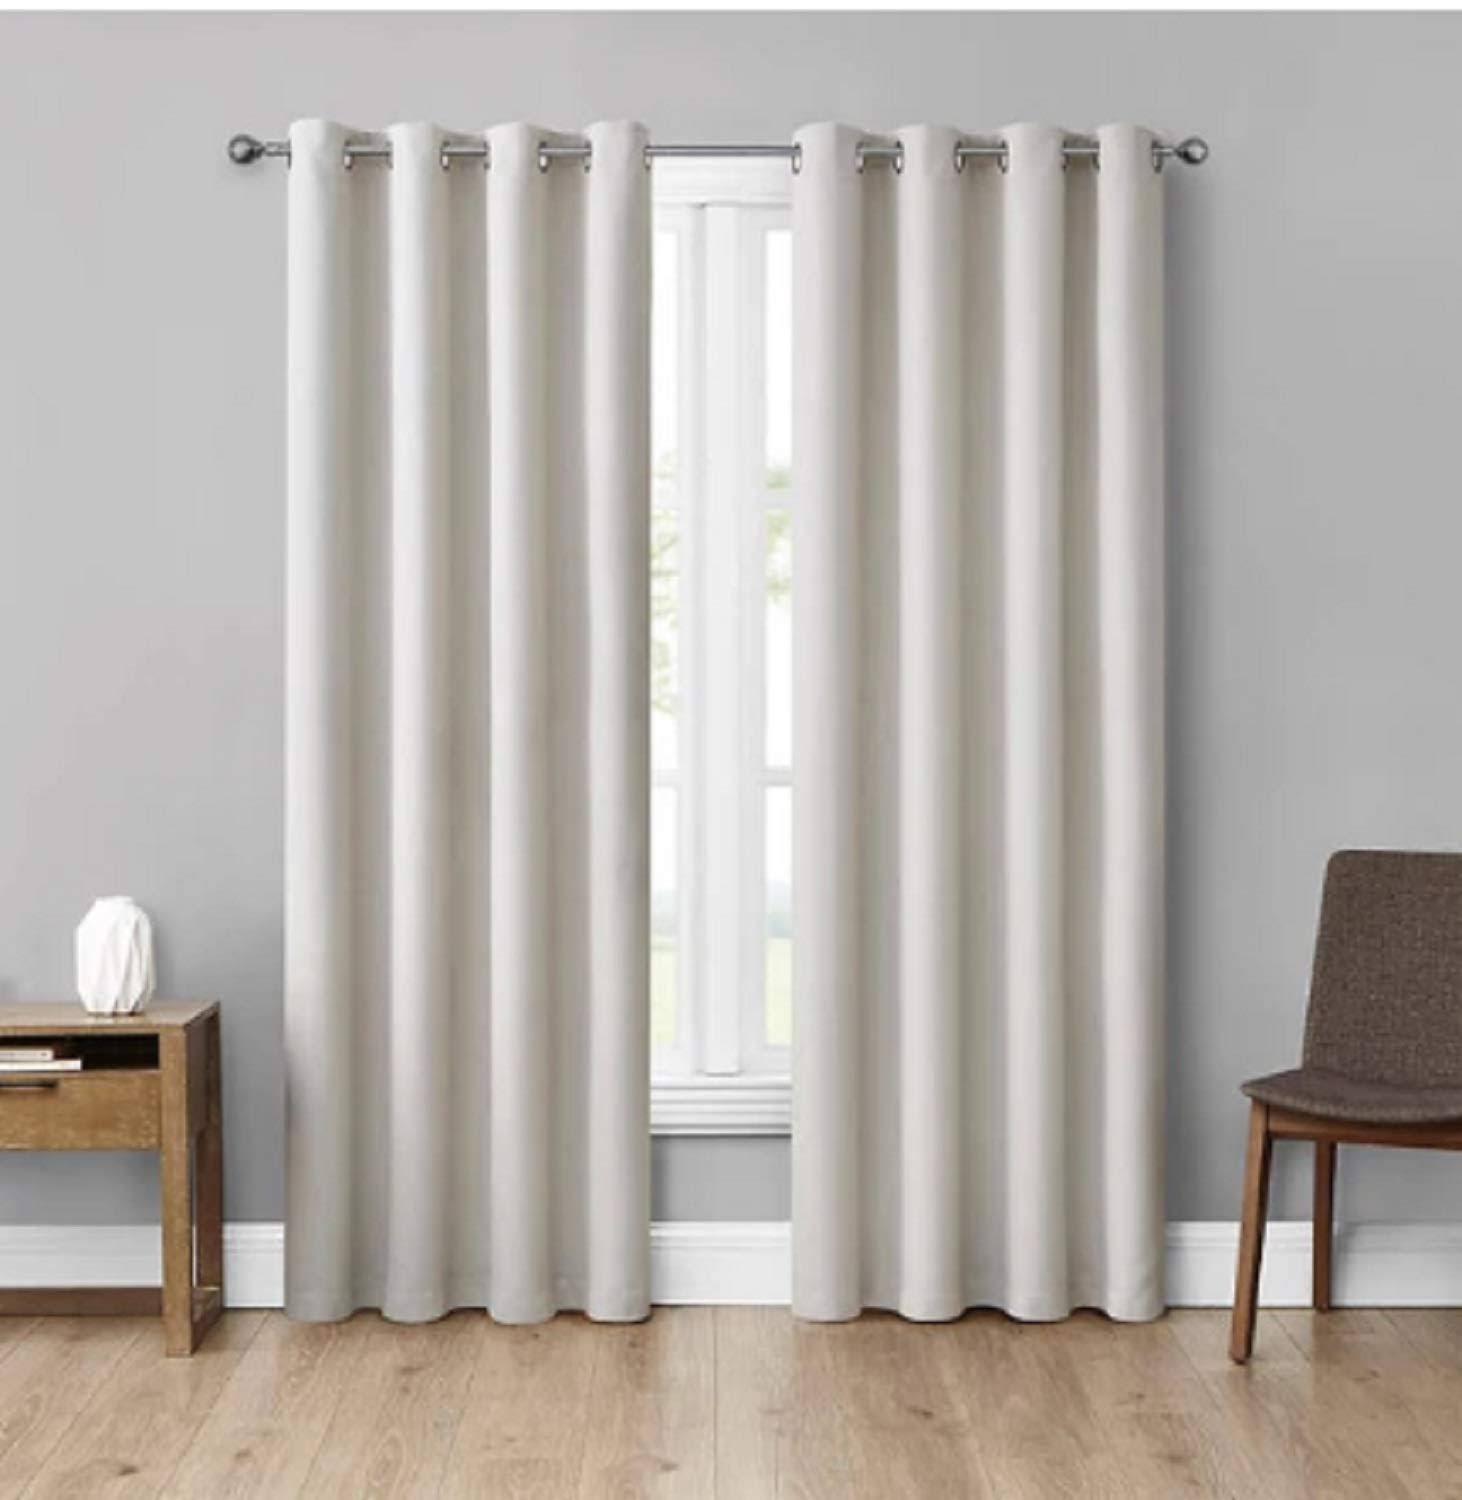 Eclipse Absolute Zero Blackout Curtains 2 Panels Kimball Cream AP39